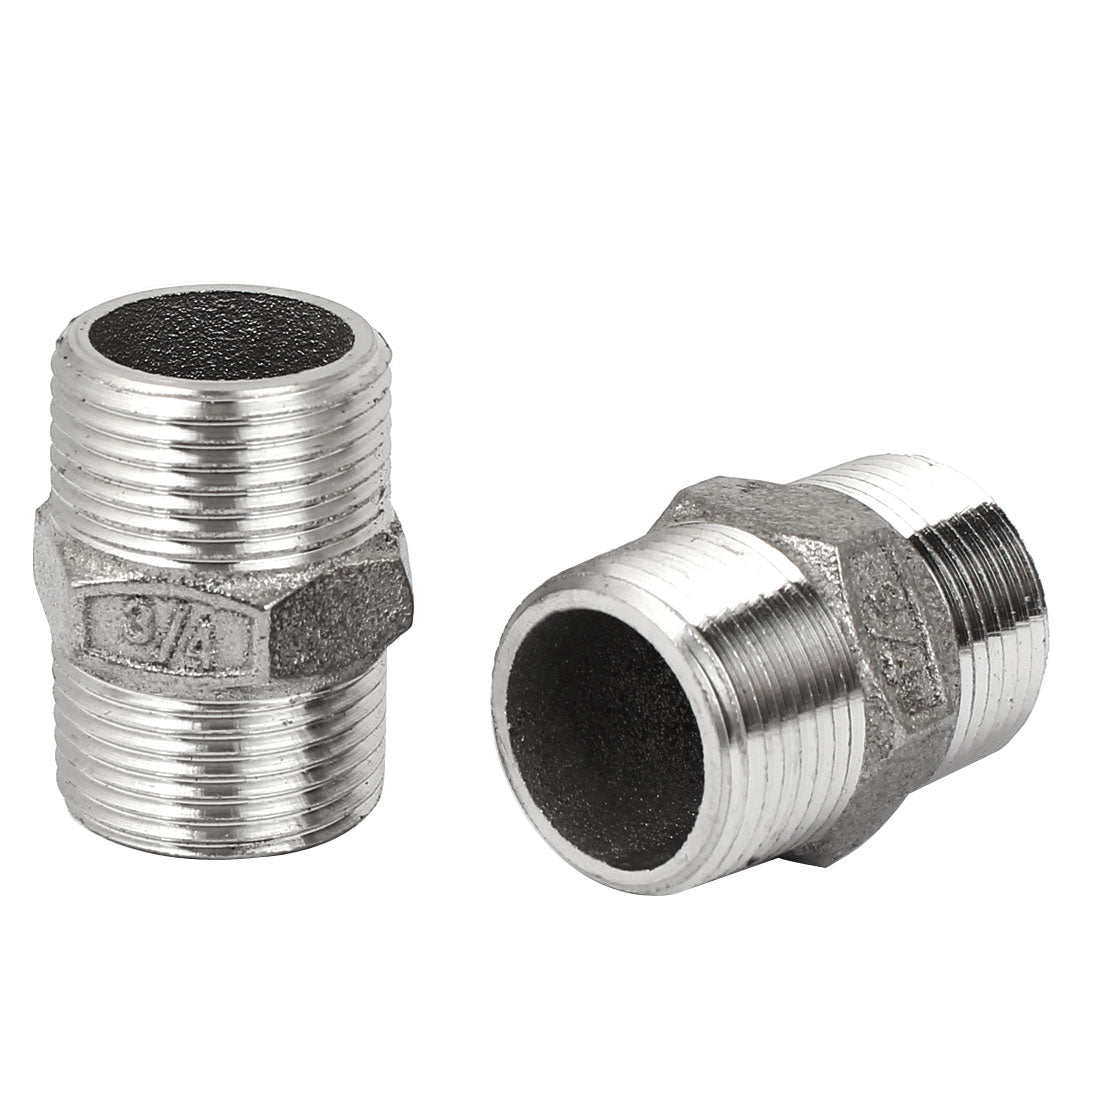 uxcell Uxcell 3/4BSP to 3/4BSP Male Thread Stainless Steel Pipe Hex Reducing Nipple Fitting 2pcs